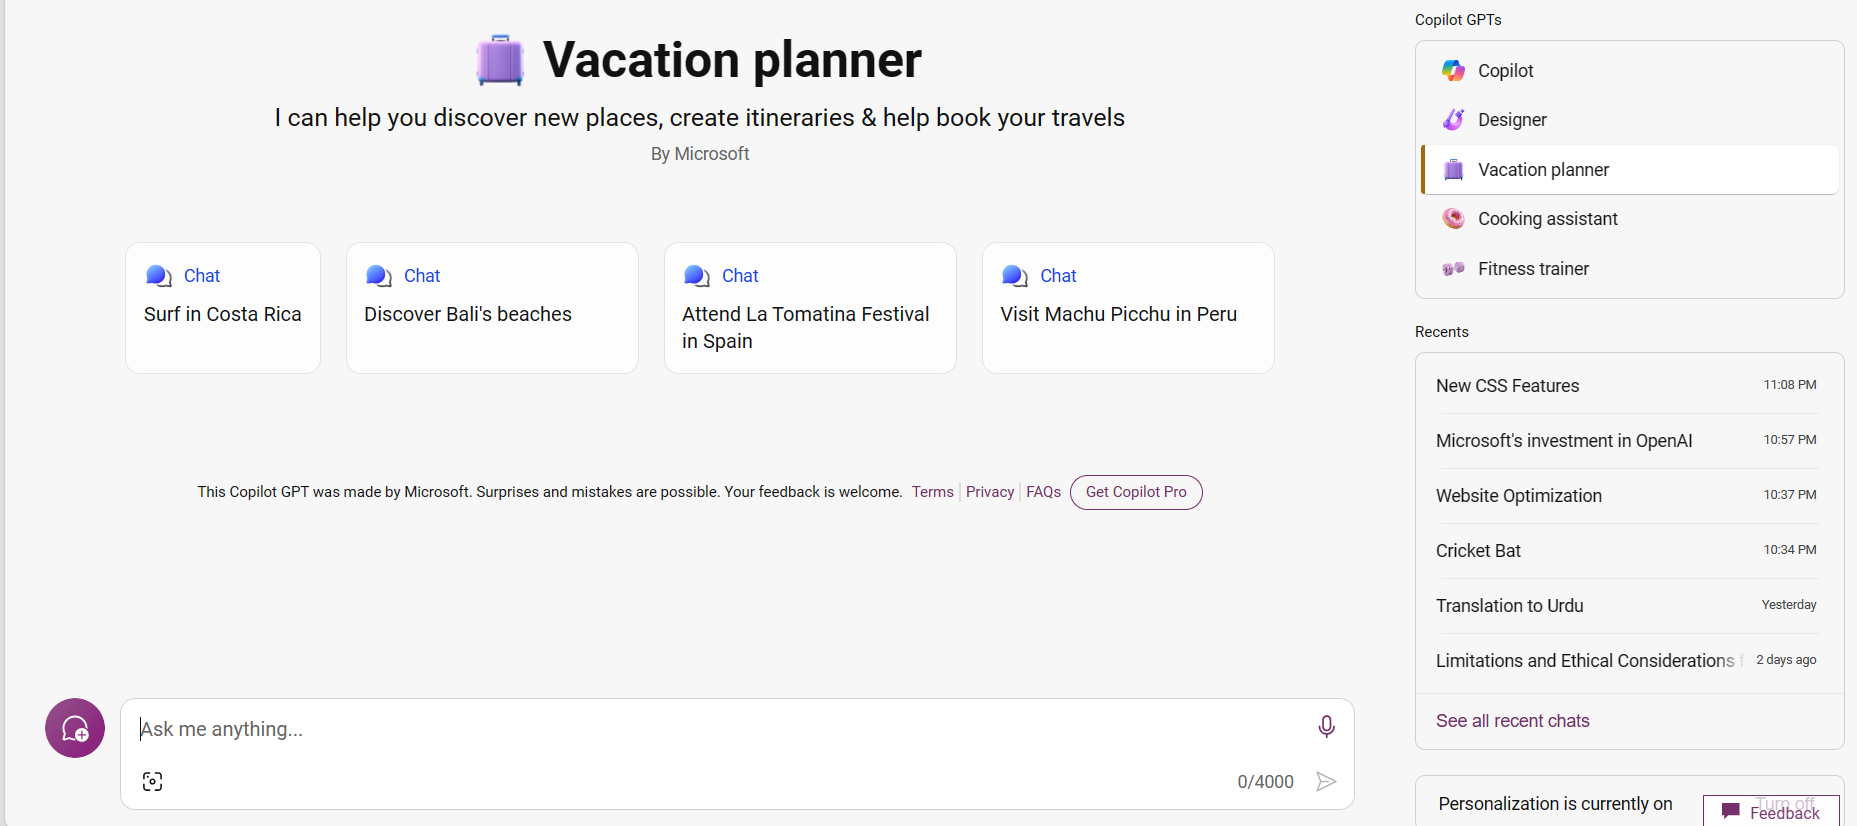 Copilot vacation planner can  help you discover new places, create intineraries & help book your travels.